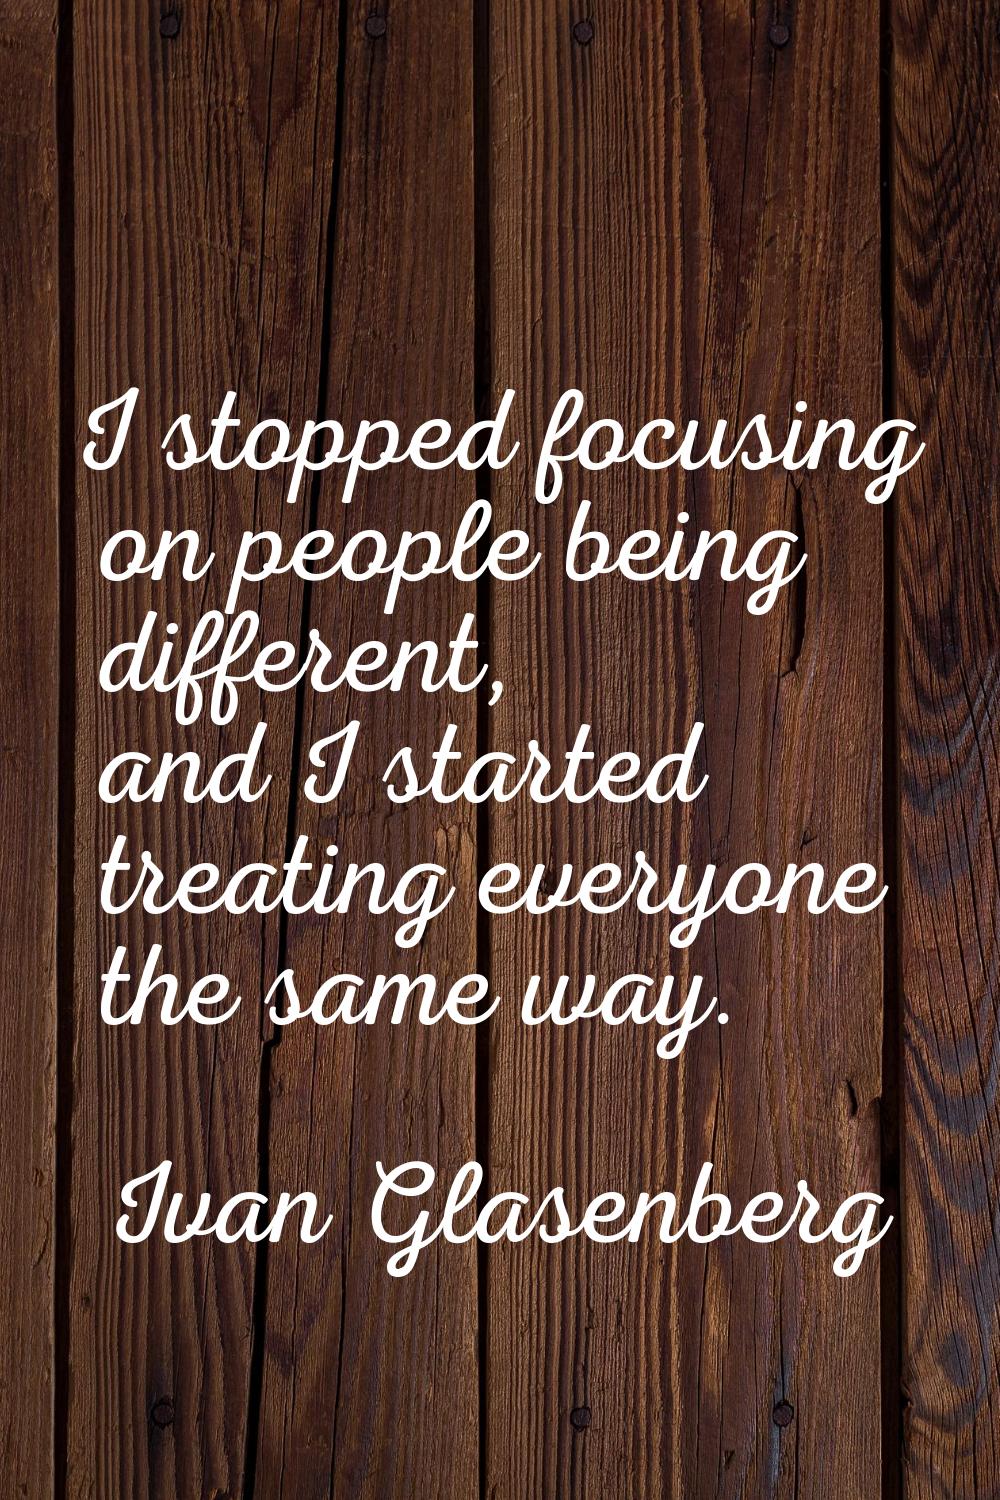 I stopped focusing on people being different, and I started treating everyone the same way.